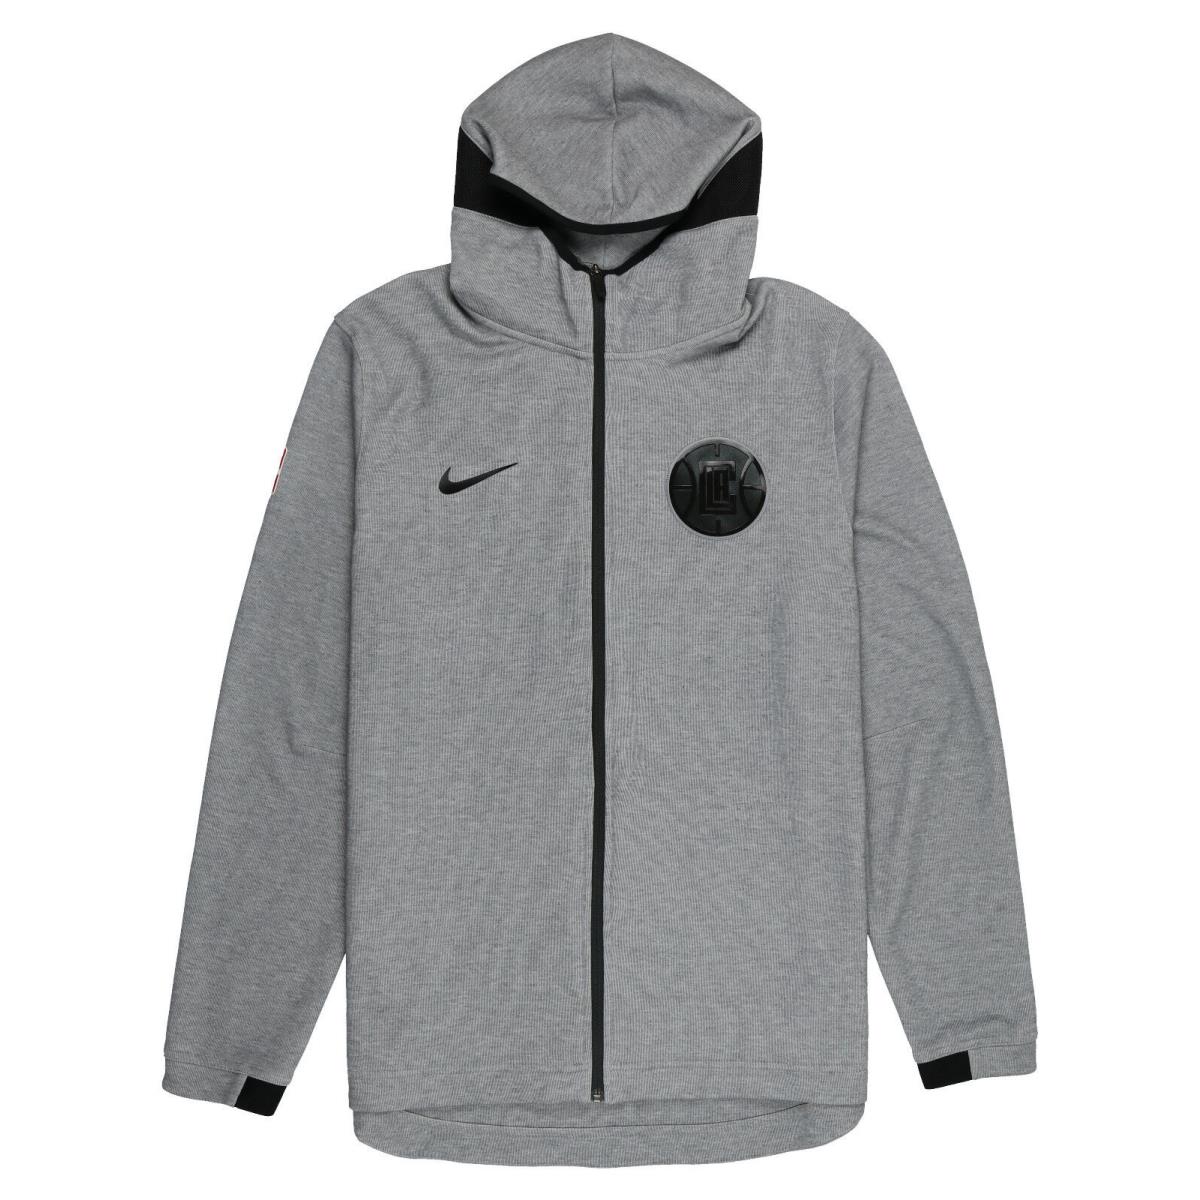 Nike Los Angeles Clippers Showtime Full Zip Hoodie XL X-large Gray Black Jacket